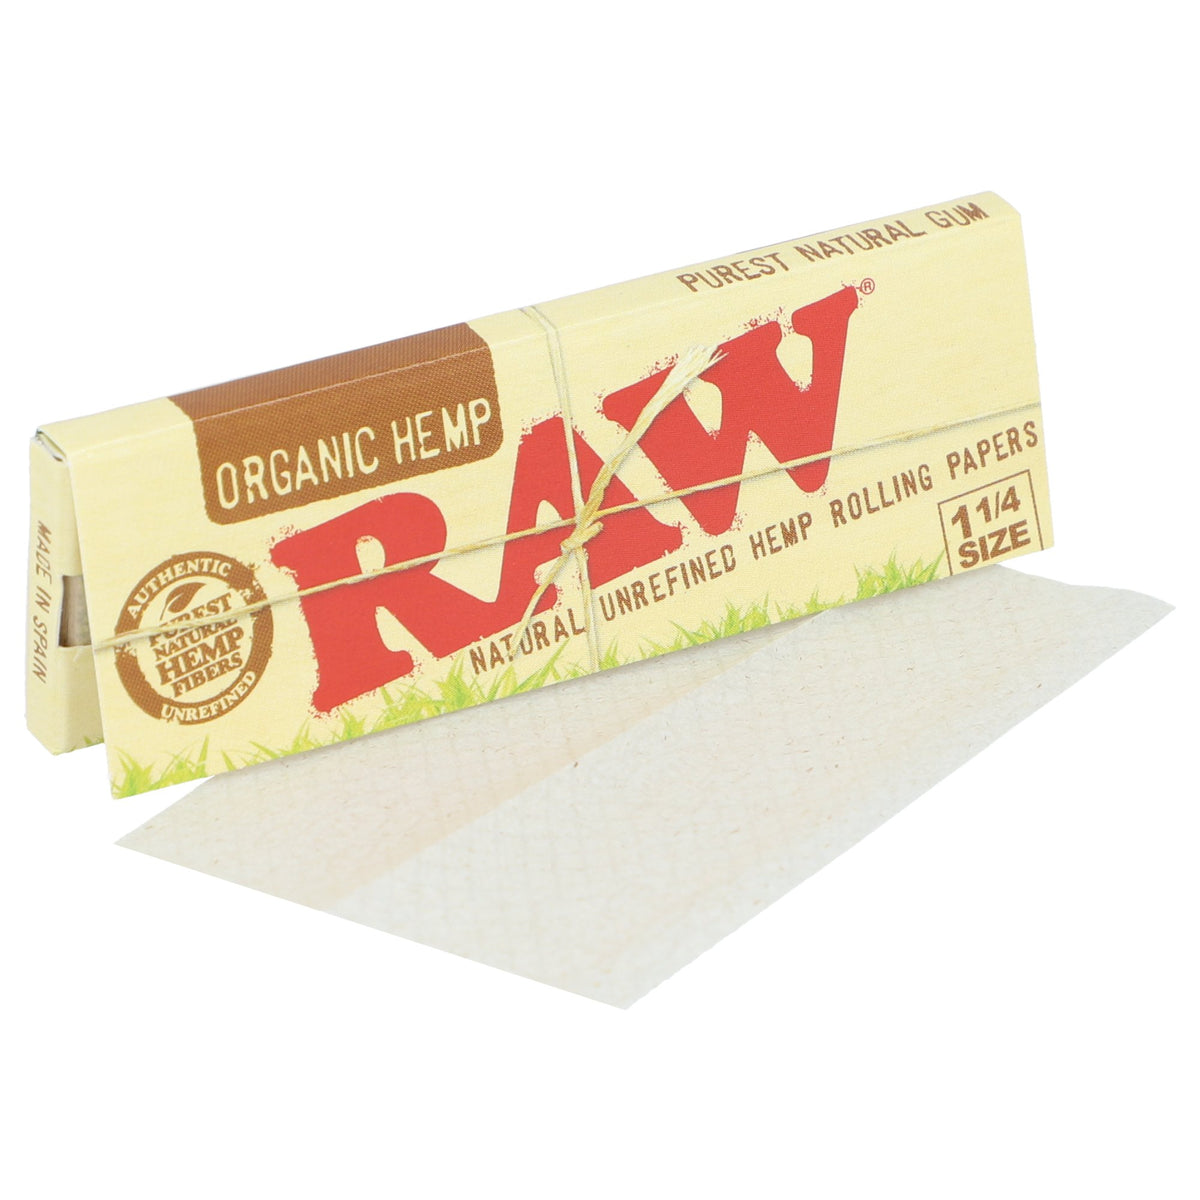 RAW Organic Hemp 1 1/4 Rolling Papers Rolling Papers esd-official